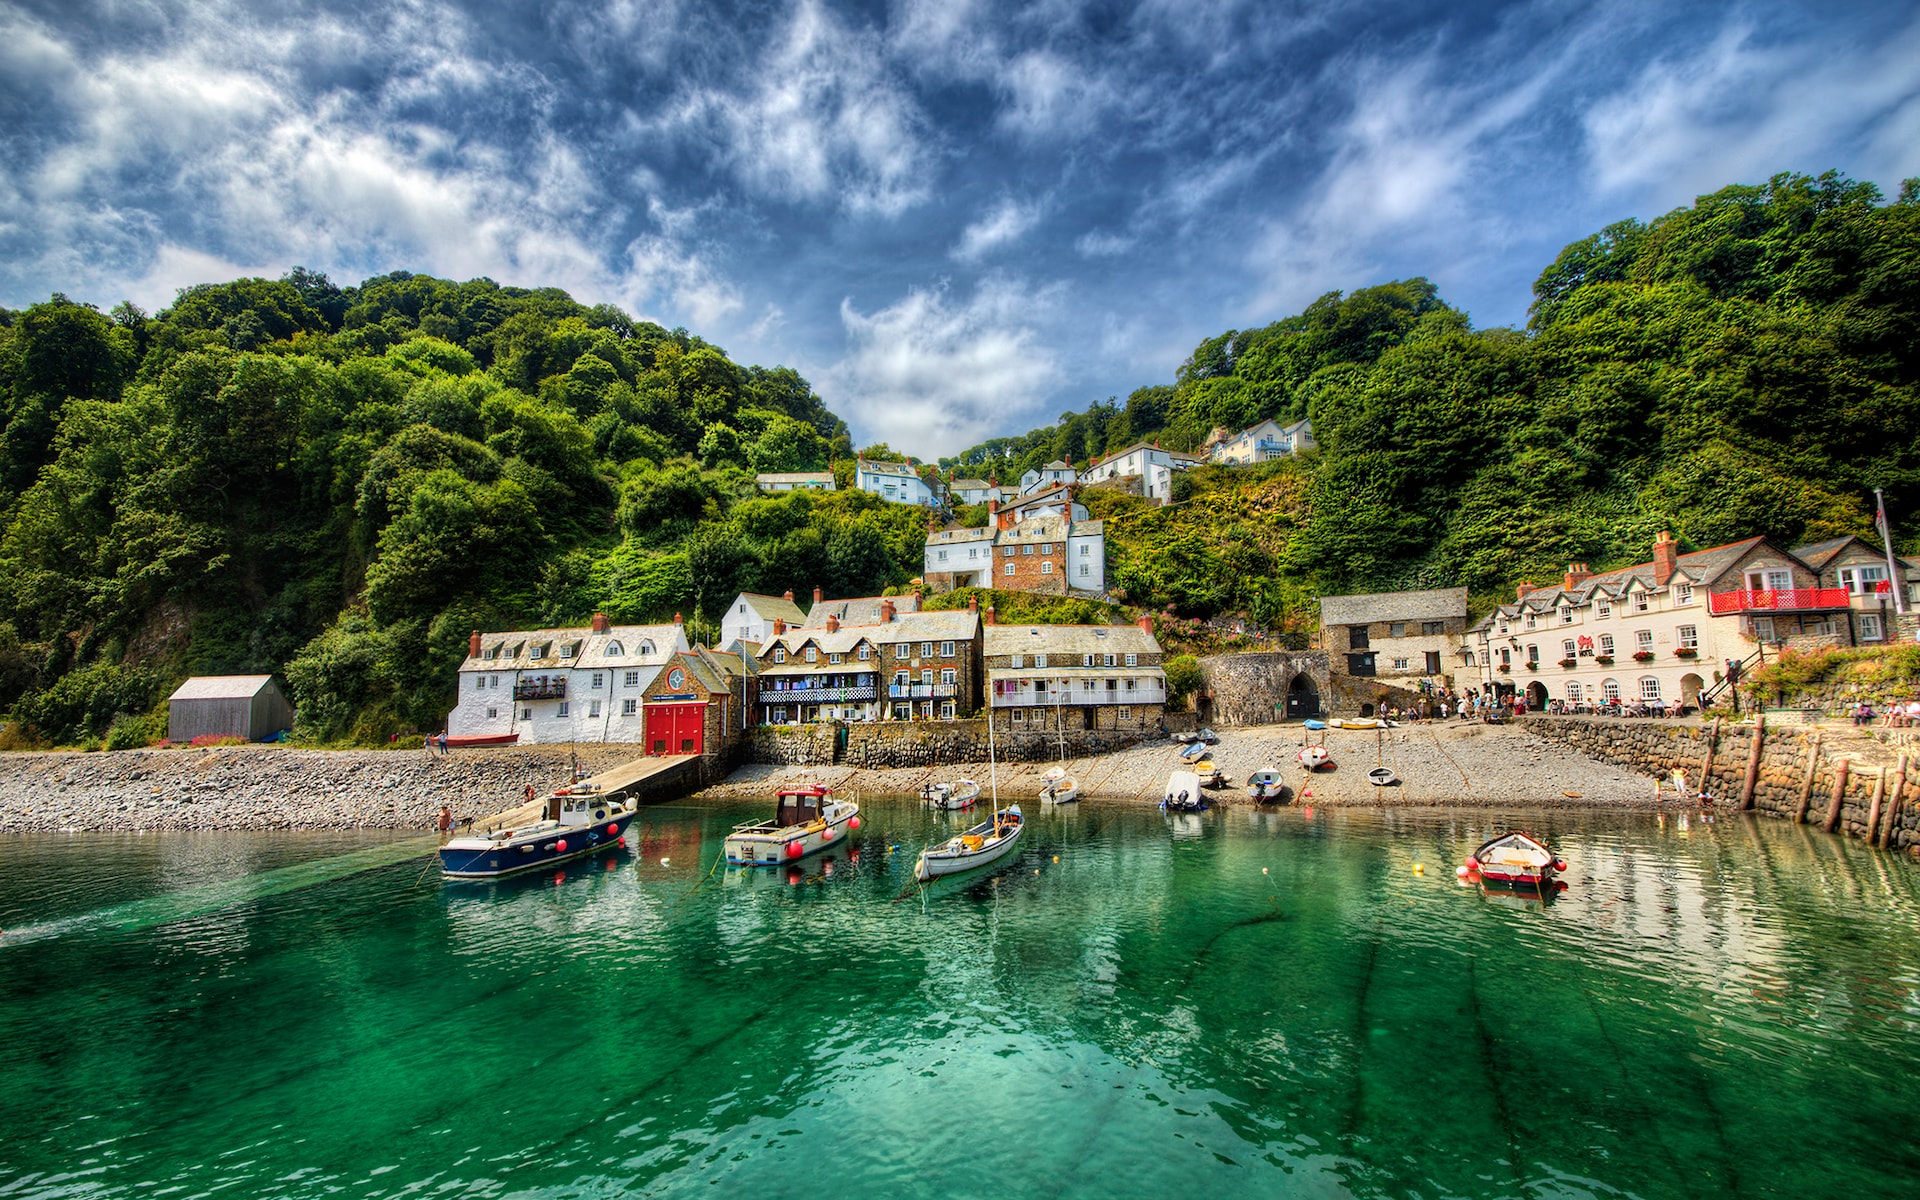 Clovelly listed as one of England’s most beautiful villages by The Telegraph